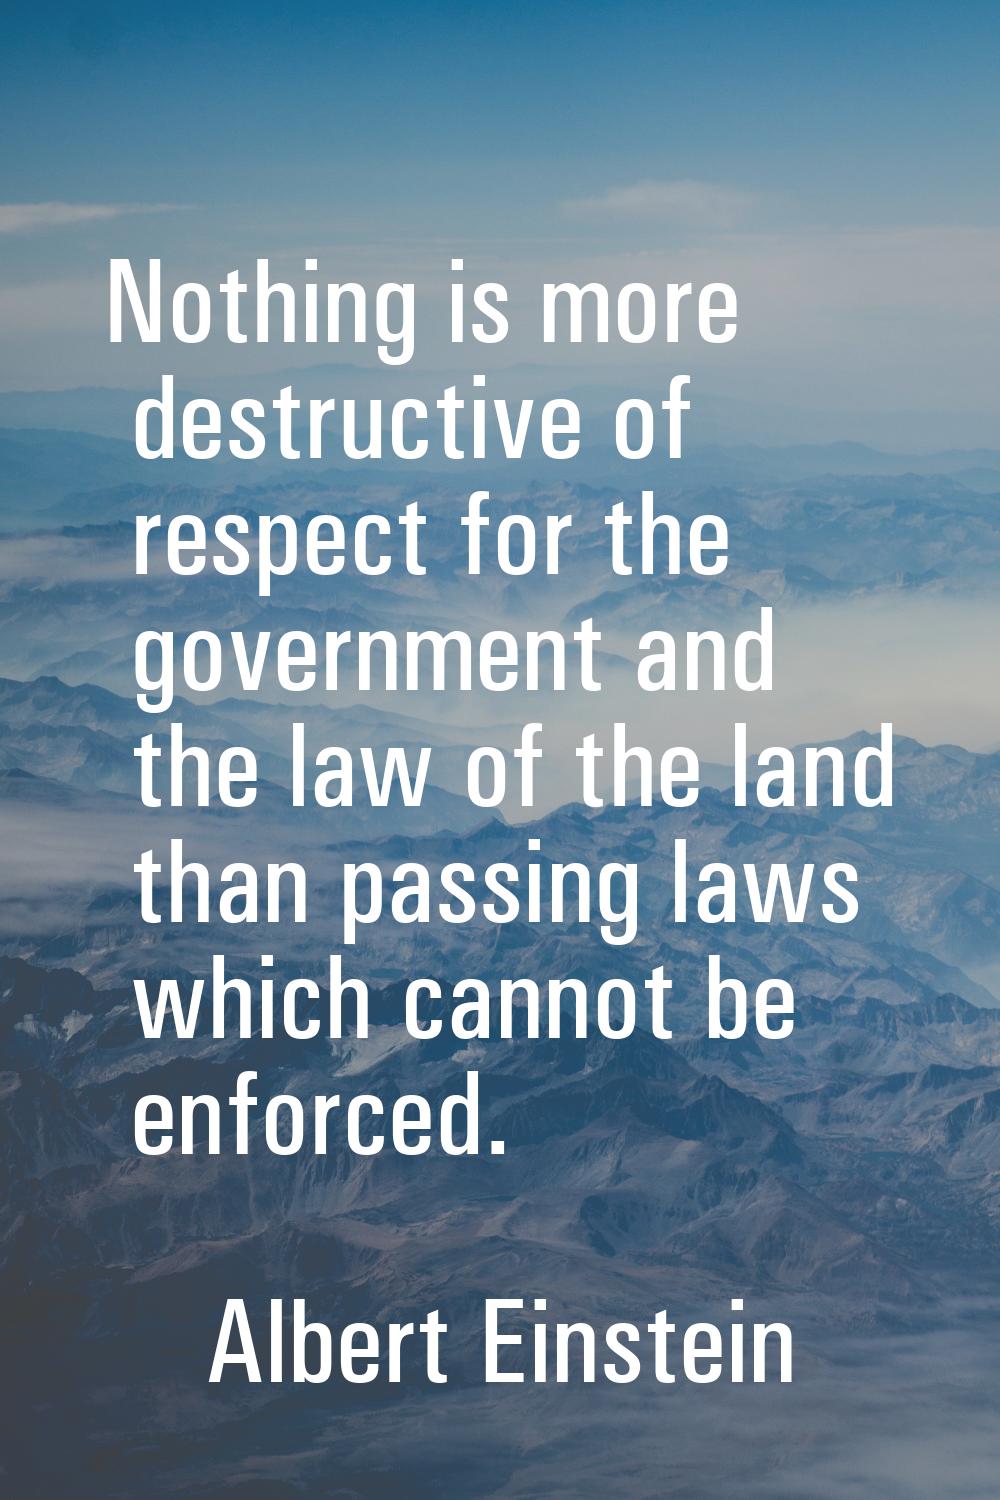 Nothing is more destructive of respect for the government and the law of the land than passing laws